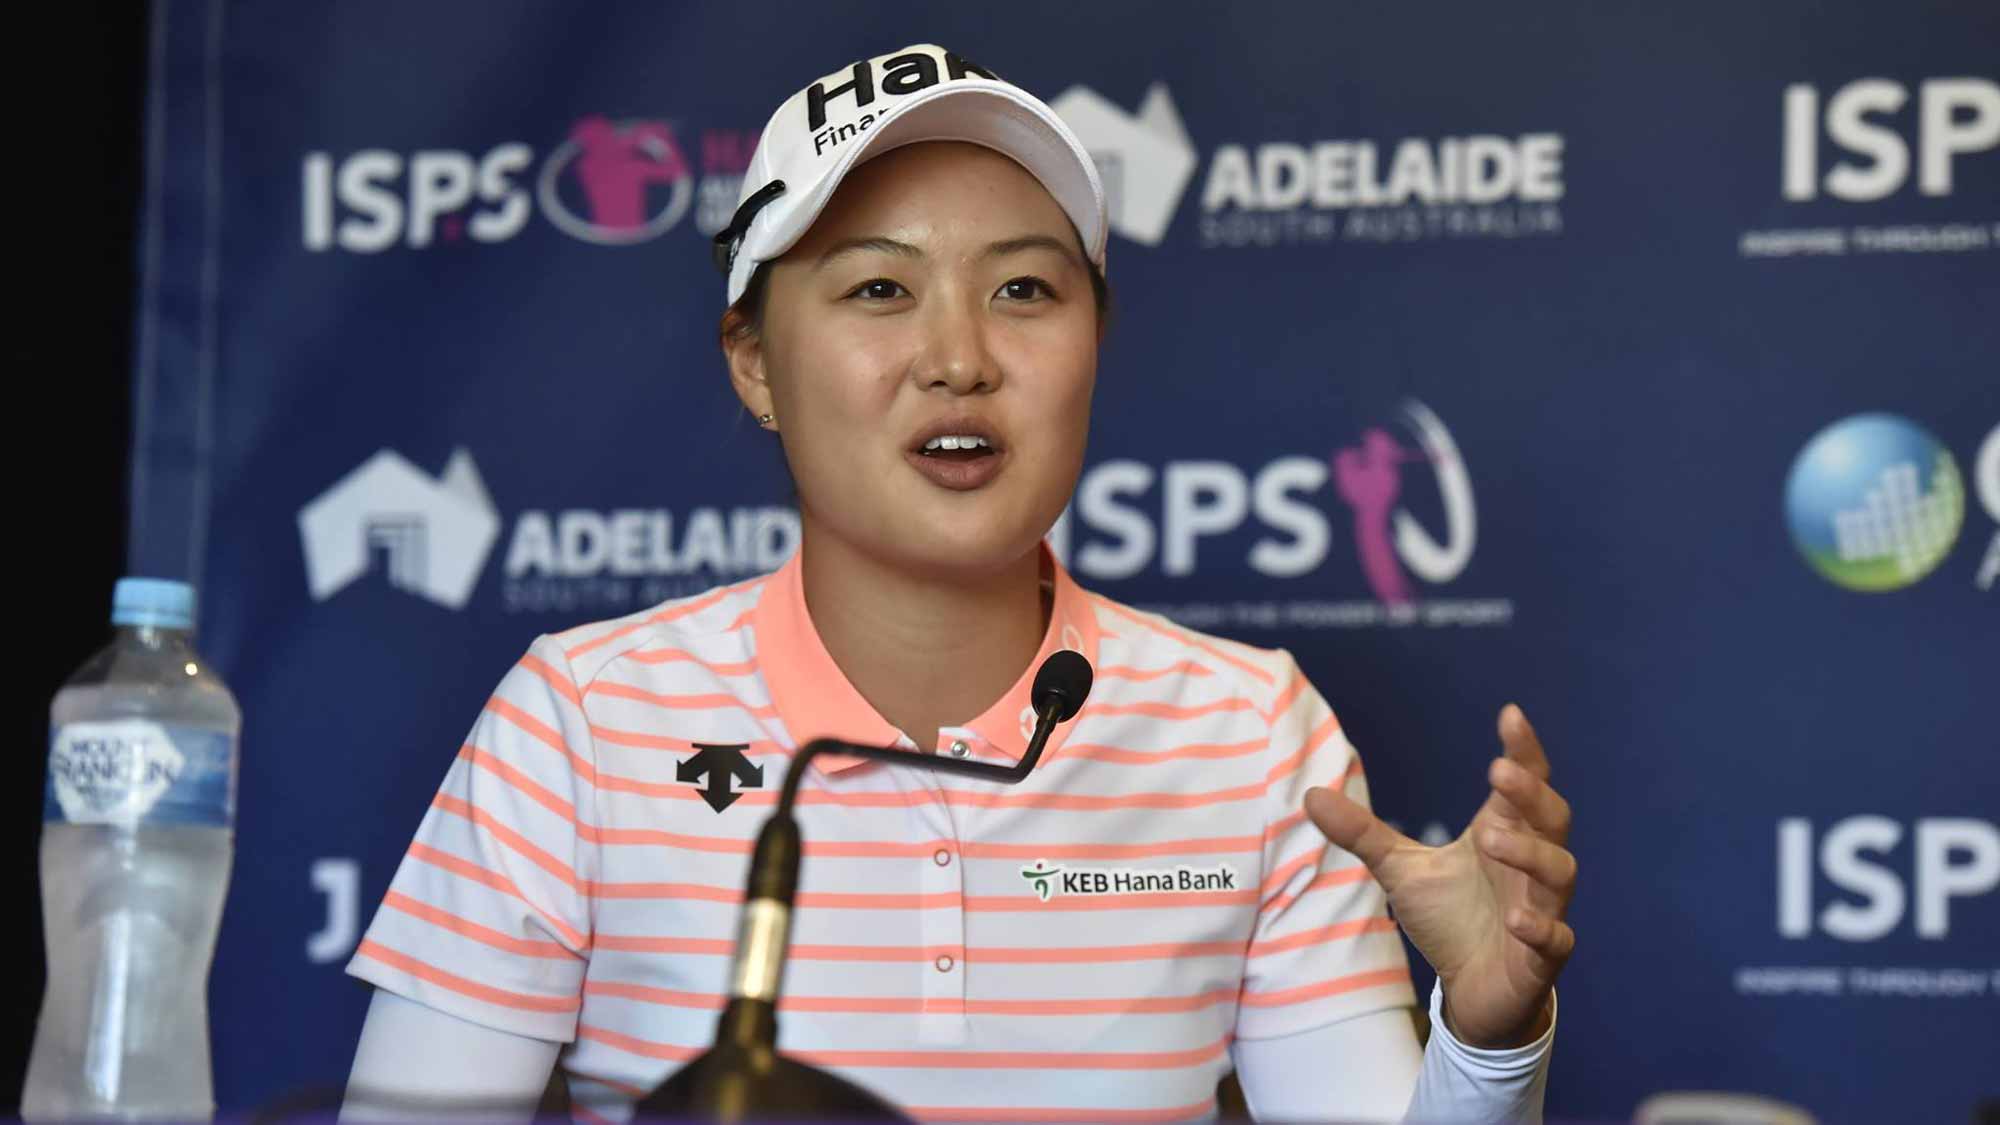 Minjee Lee during her Pre-Tournament Press Conference at the ISPS Handa Women's Australian Open